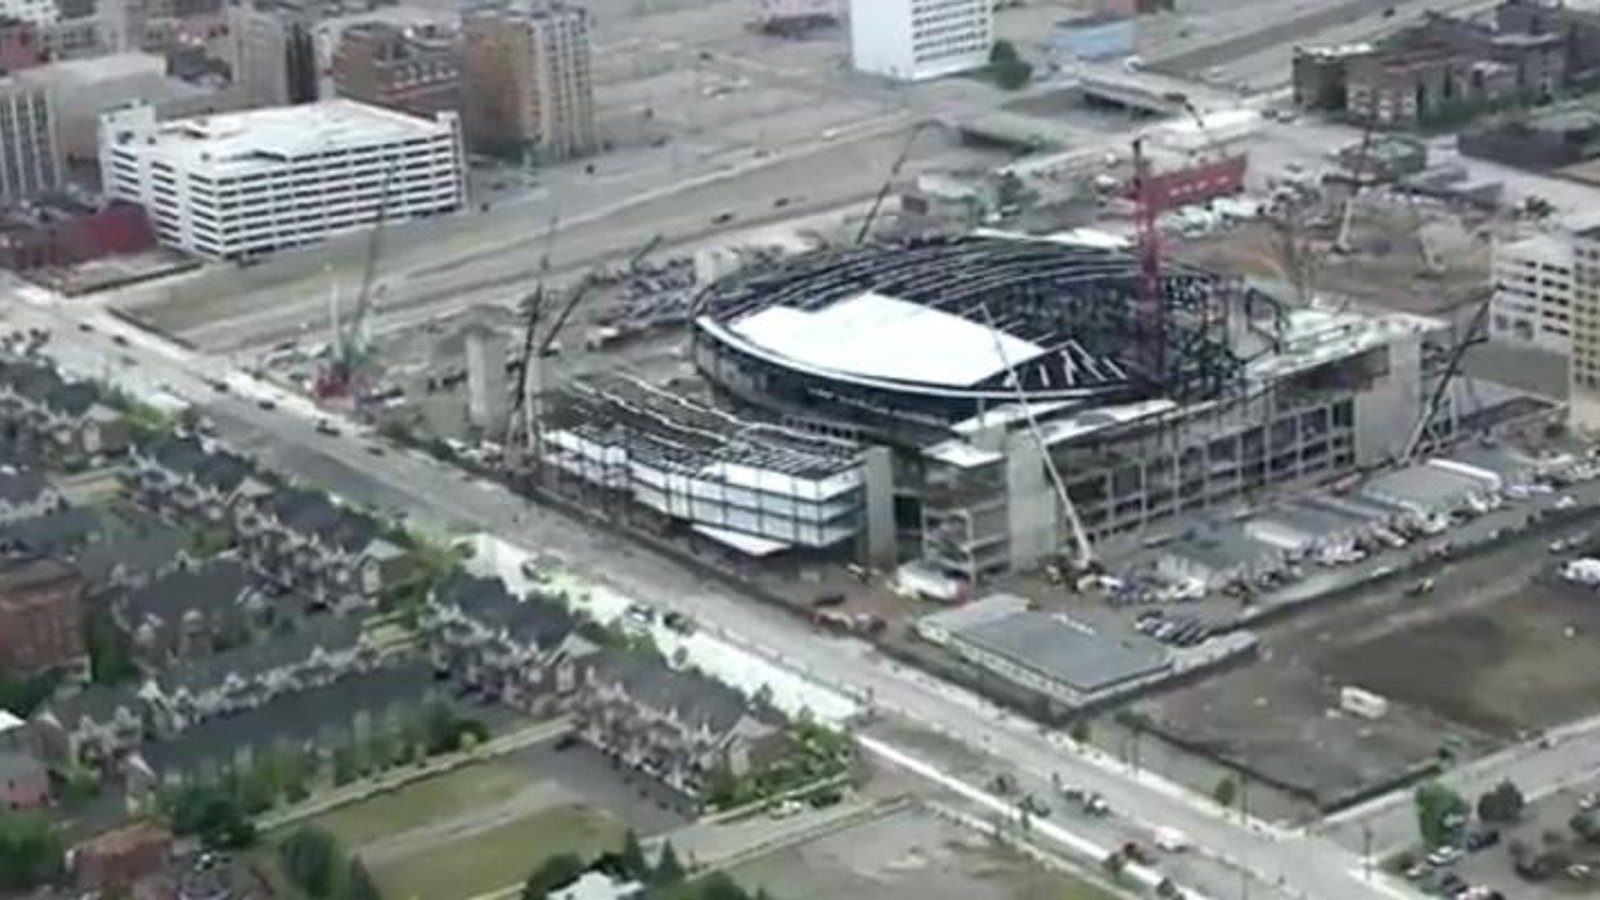 Video shows progress on Red Wings new “Little Caesars Arena.”